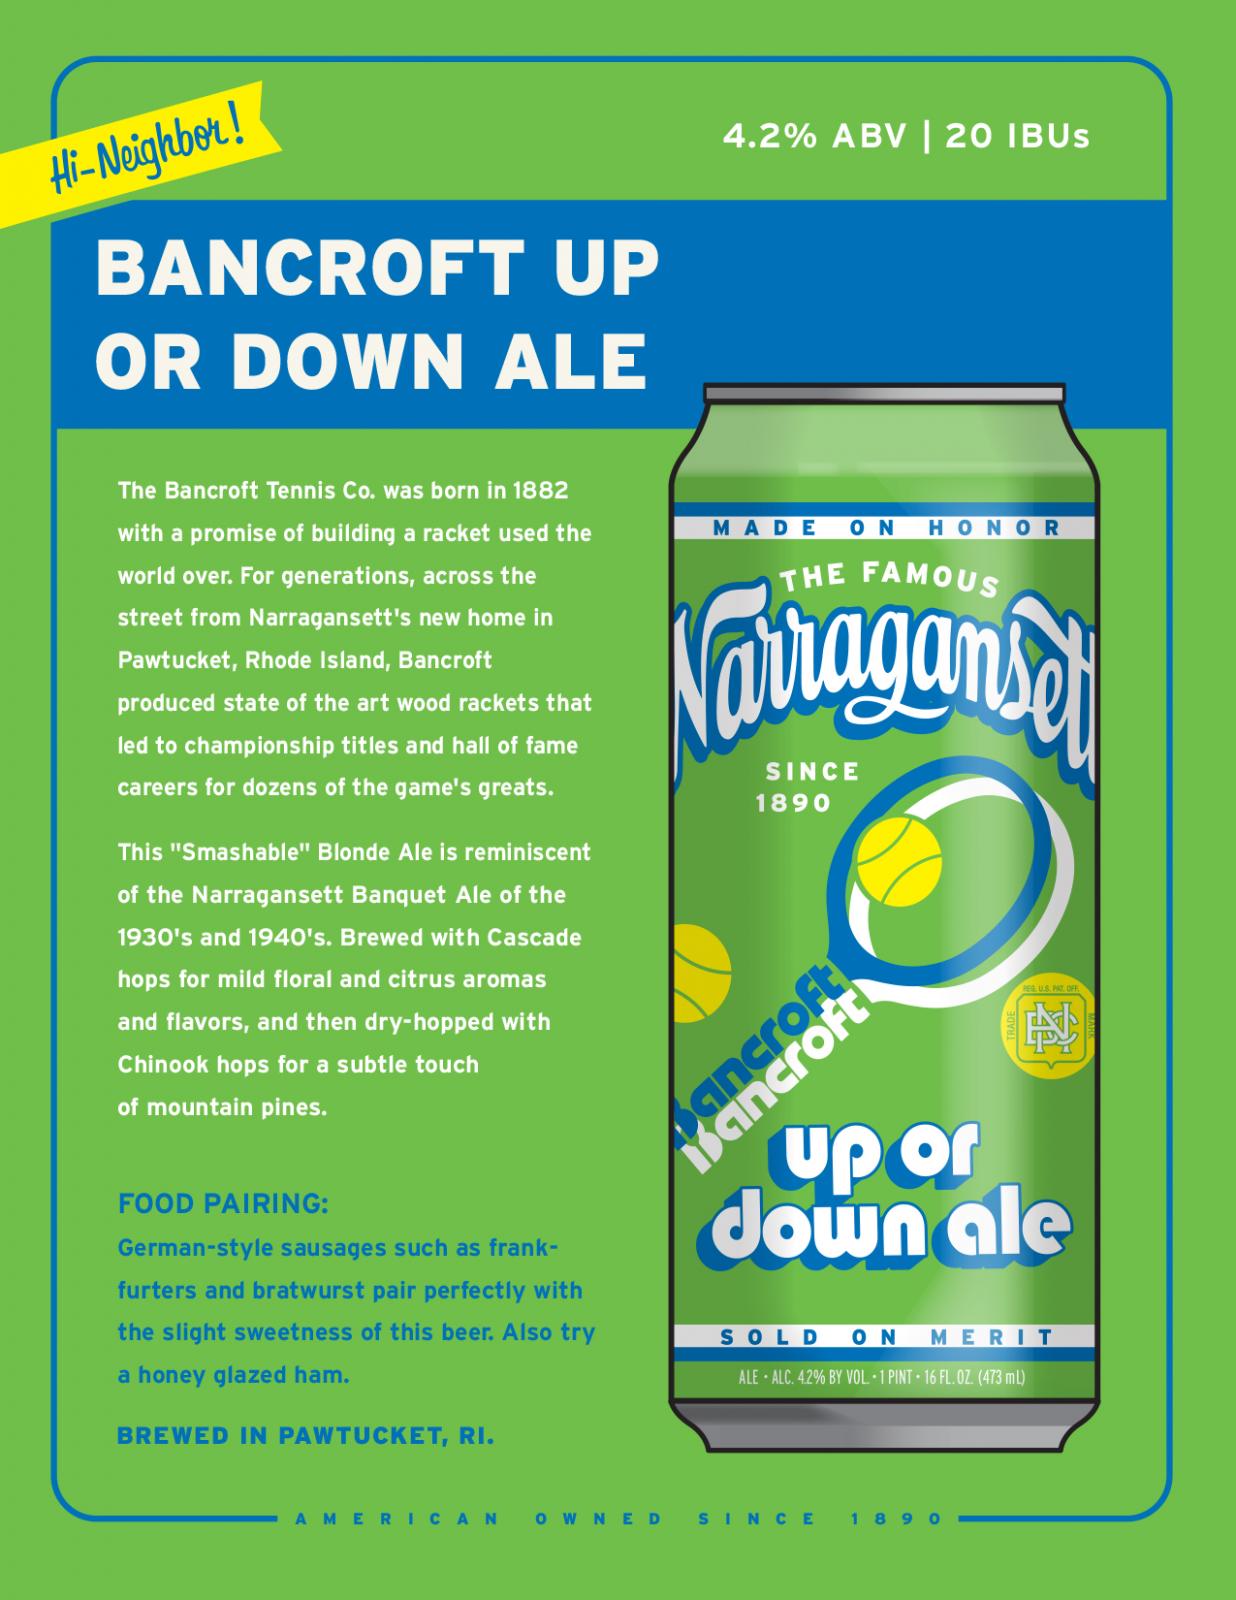 Bancroft Up or Sown Ale